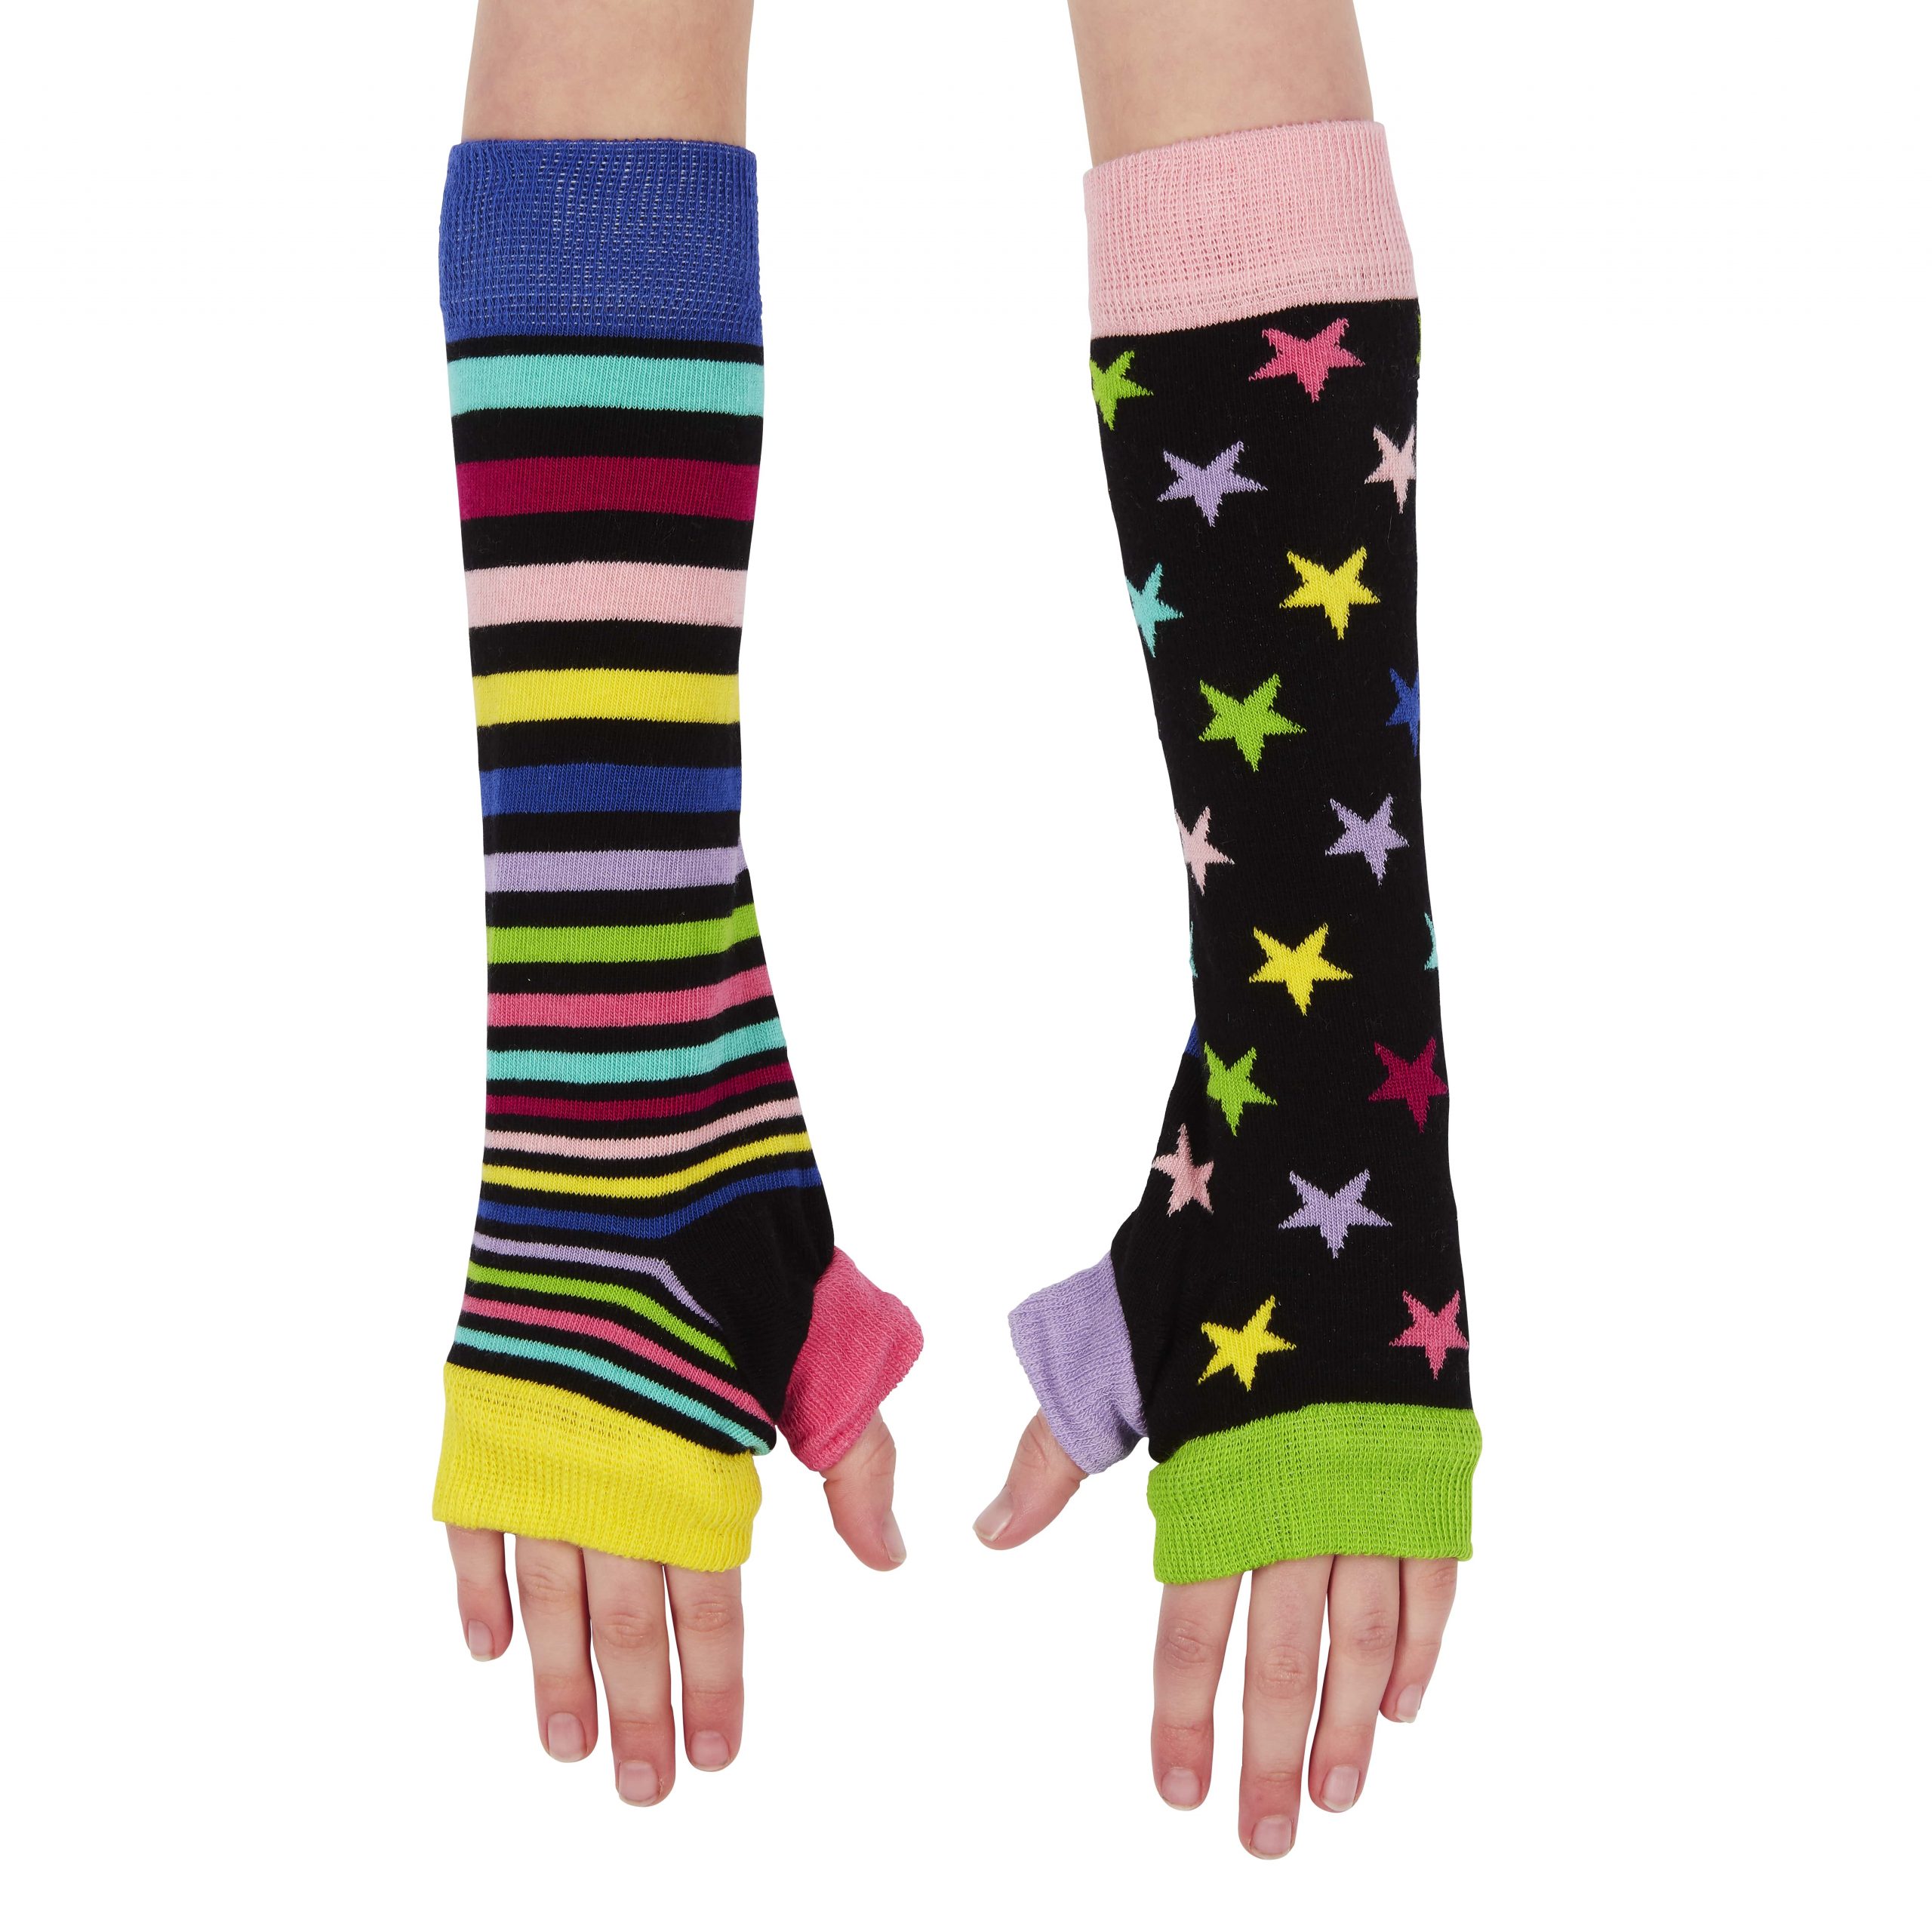 United Oddsocks Stripes and Stars One Size Arm Warmers